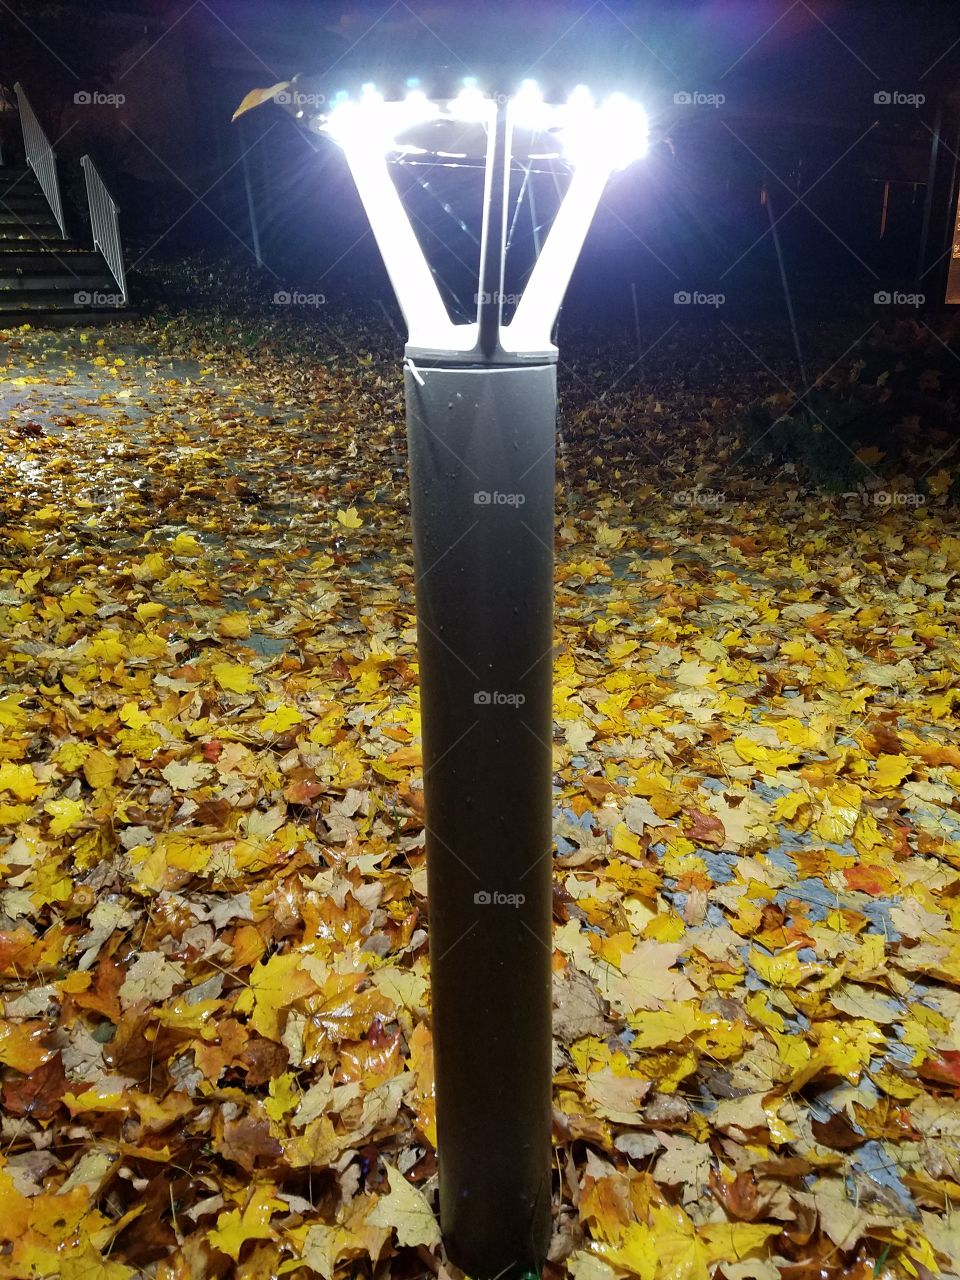 A light surrounded by fallen leaves at night